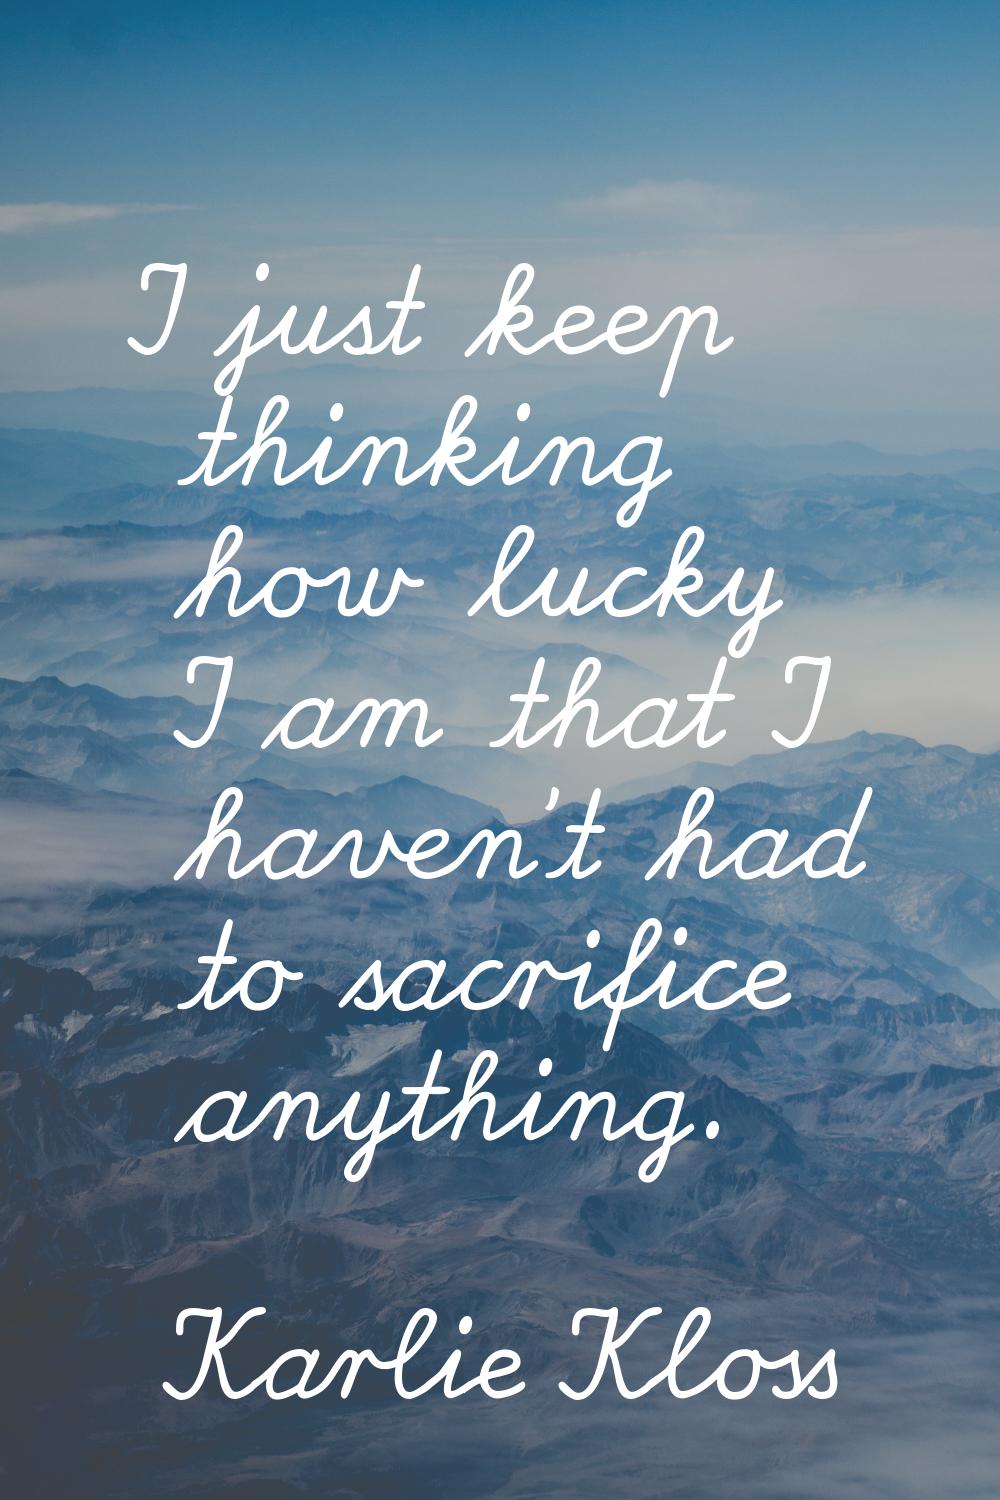 I just keep thinking how lucky I am that I haven't had to sacrifice anything.